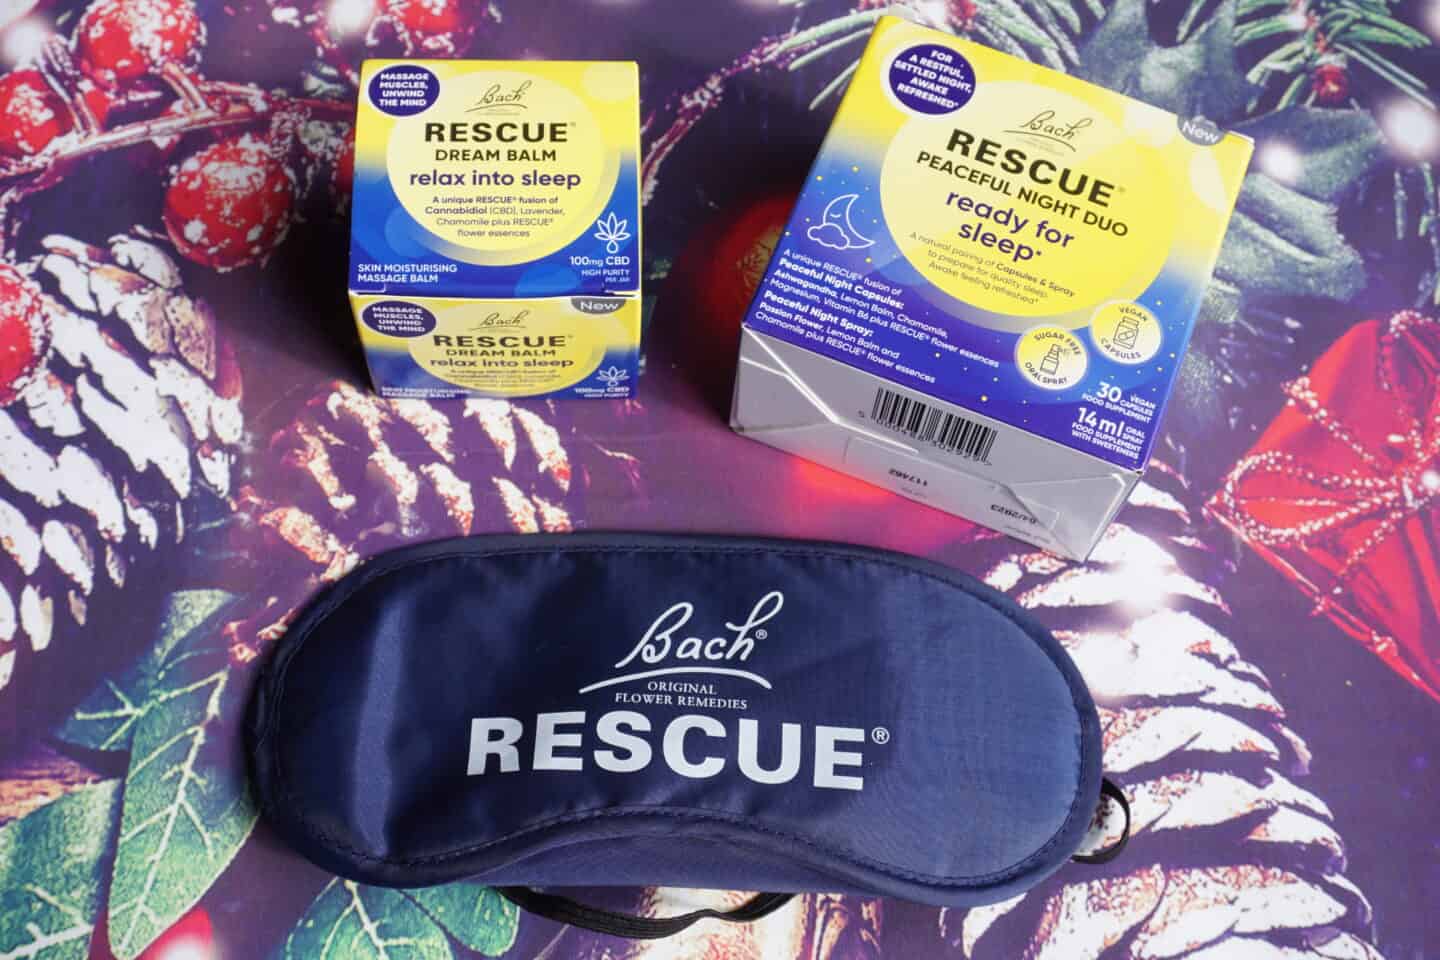 Bach Rescue Dream Balm and Peaceful Night Duo